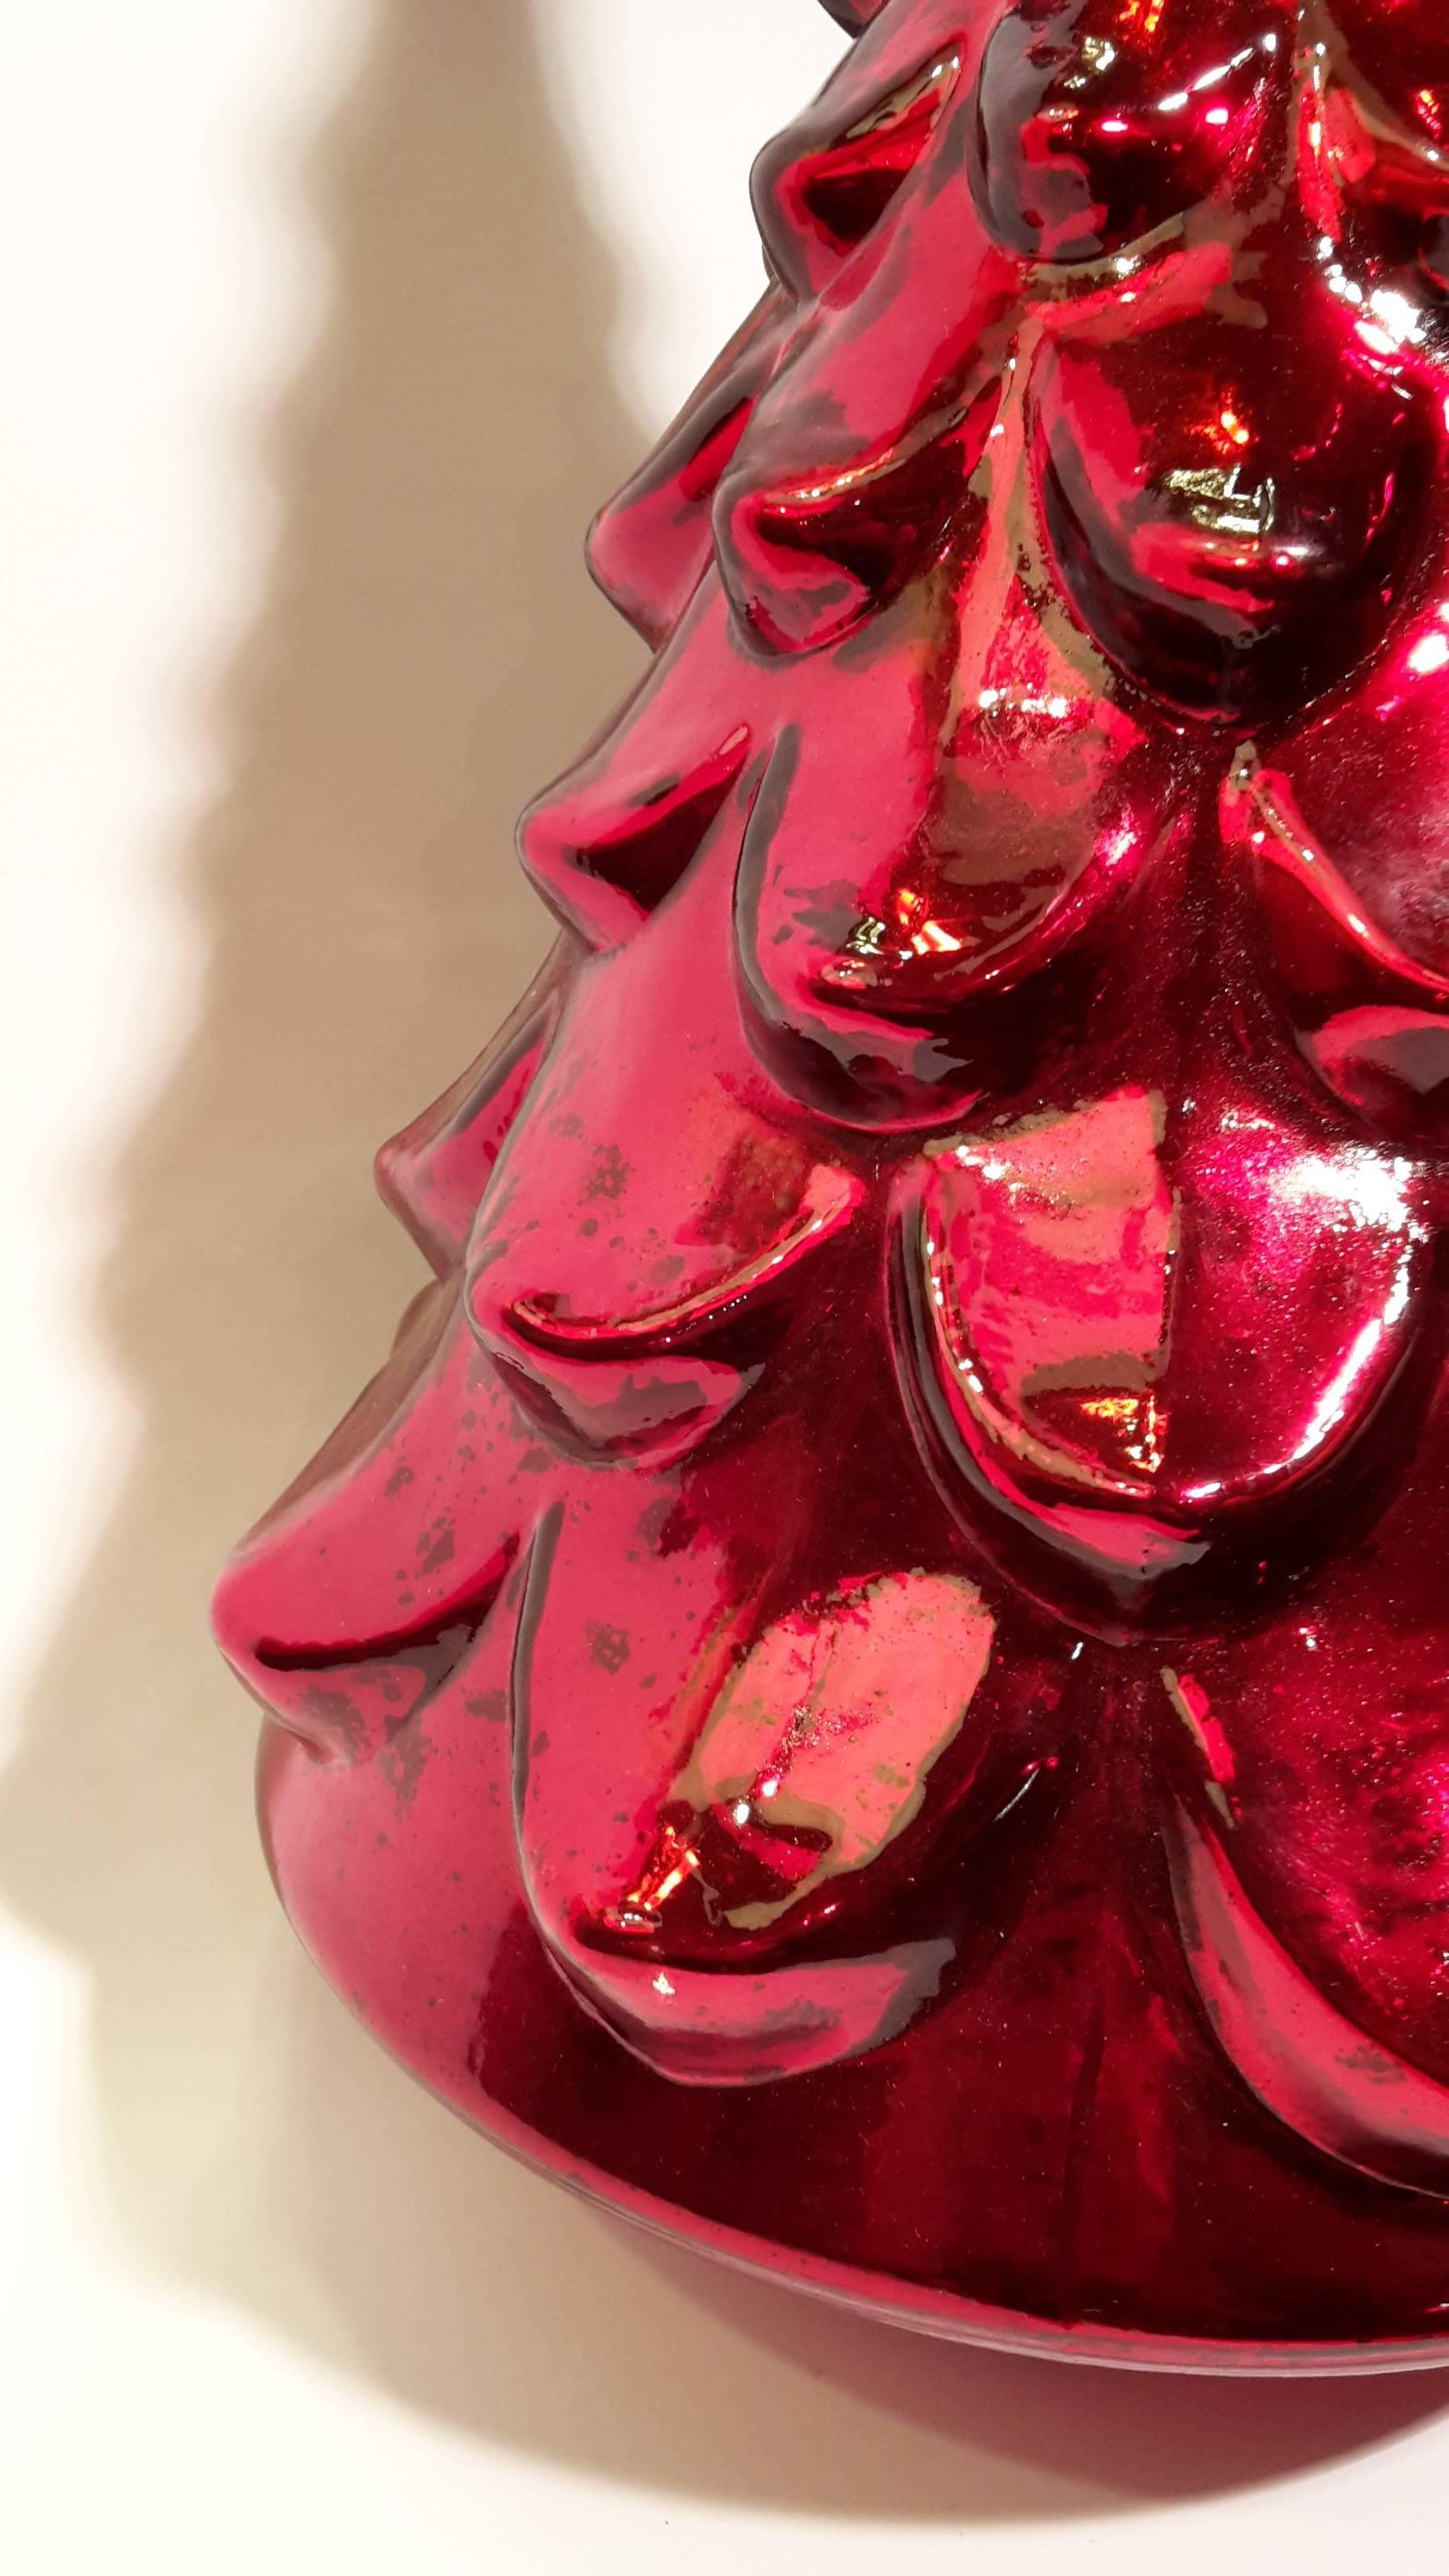 Funky and original, this contemporary French Christmas tree is in red glass.
Great color, nice size, to decorate your house for Christmas holidays.